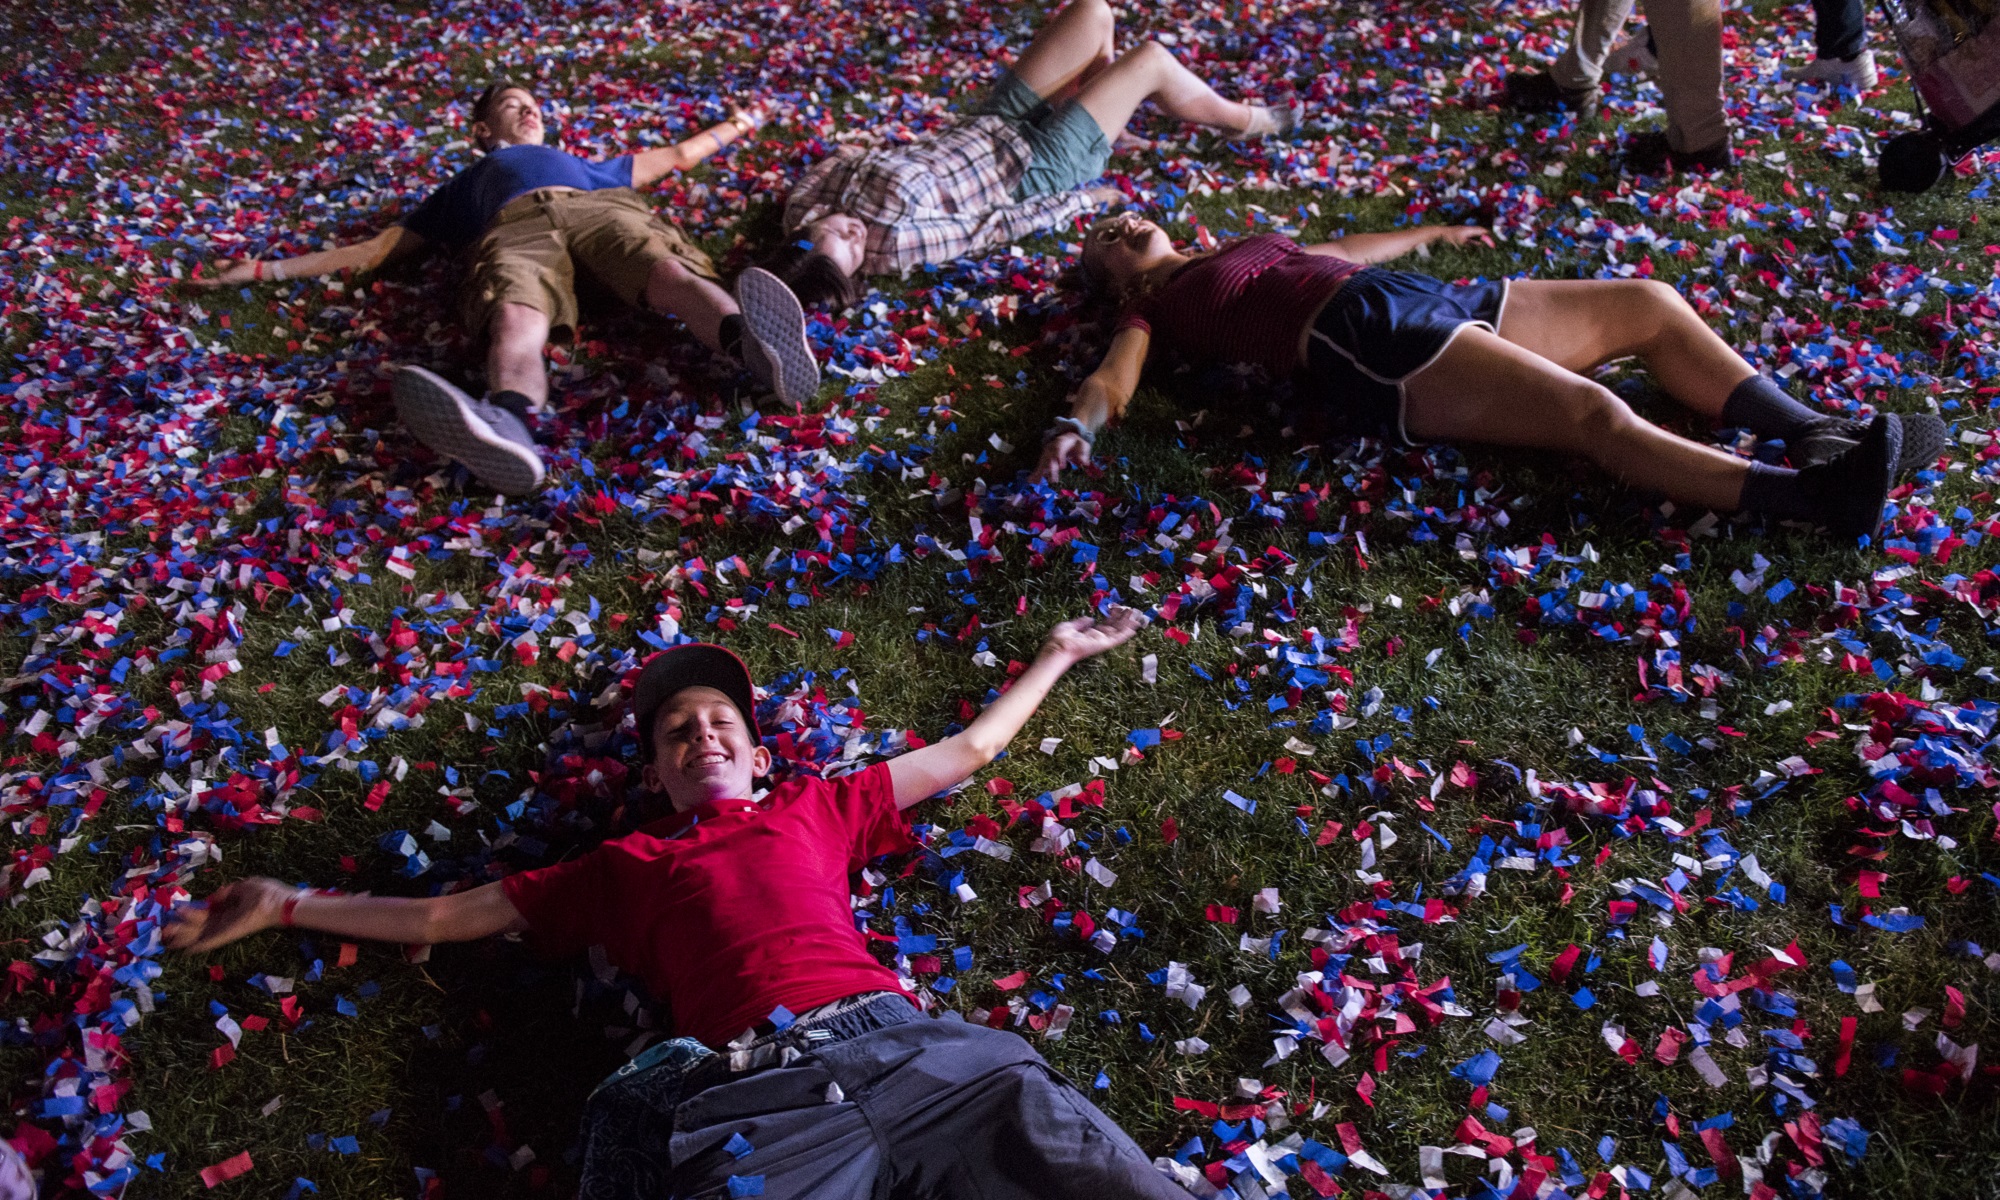 Fourth of July partygoers playing in red, white, and blue confetti, which could be a fireworks alternative